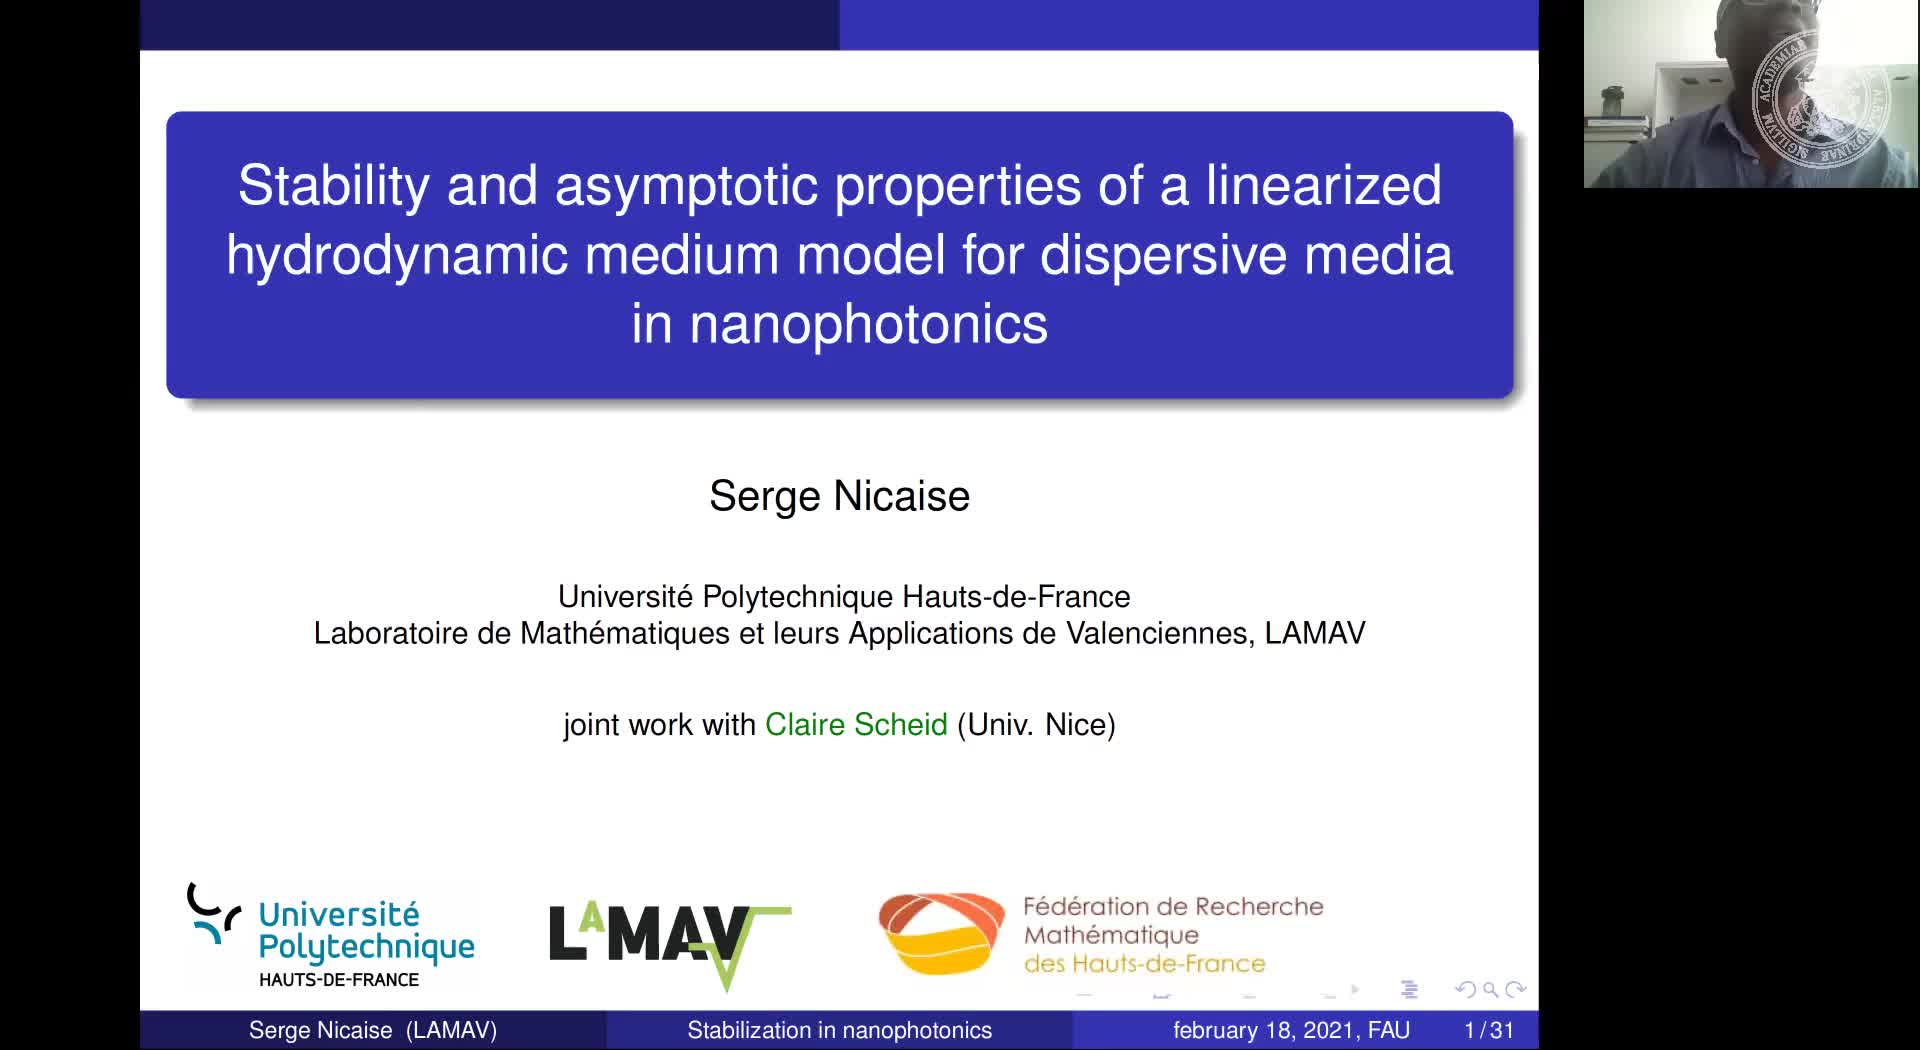 Stability and asymptotic properties of a linearized hydrodynamic medium model for dispersive media in nanophotonics (S. Nicaise, Université Polytechnique Hauts-de-France) preview image